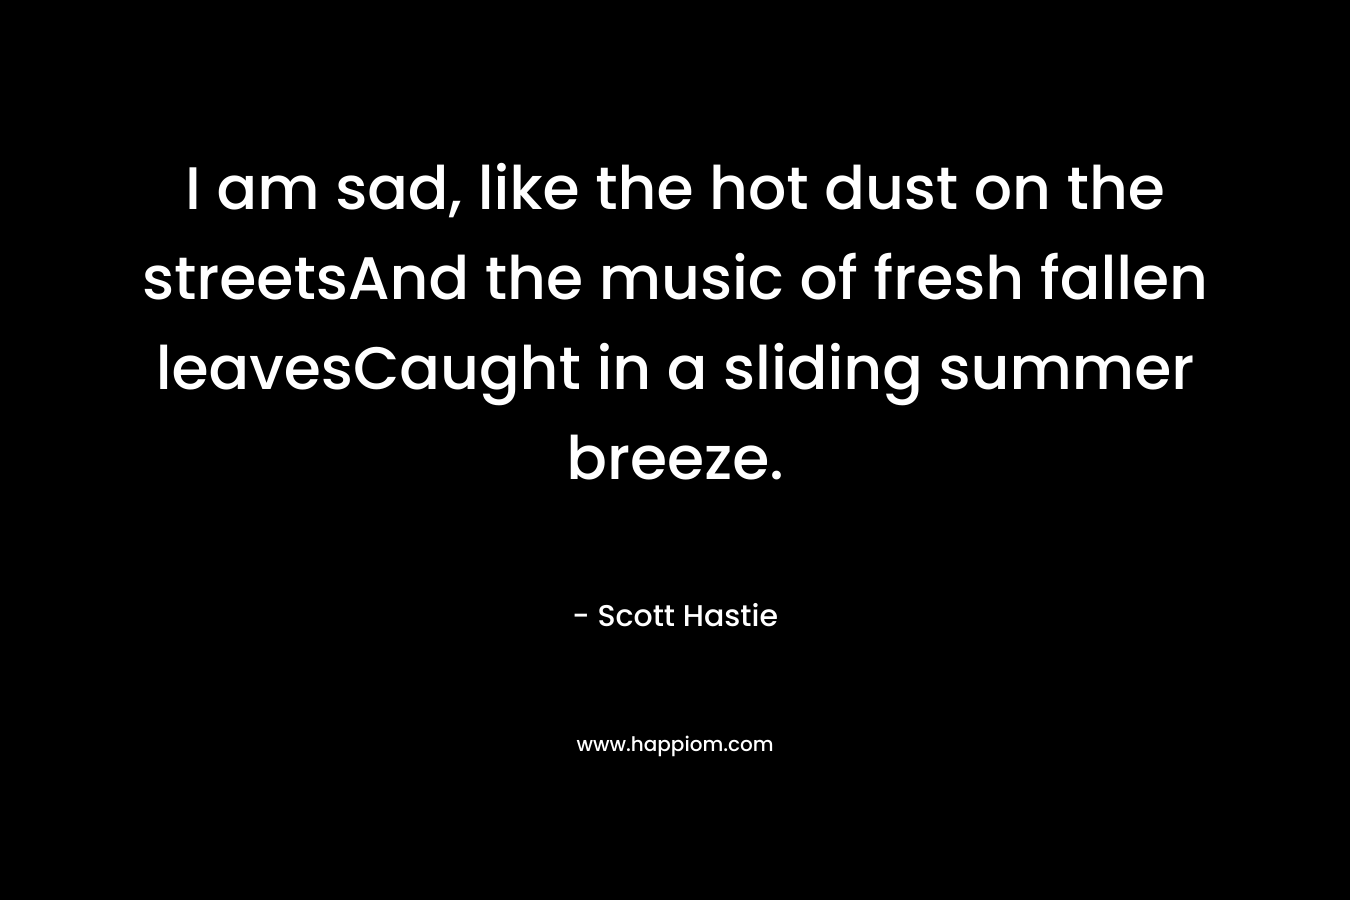 I am sad, like the hot dust on the streetsAnd the music of fresh fallen leavesCaught in a sliding summer breeze. – Scott Hastie